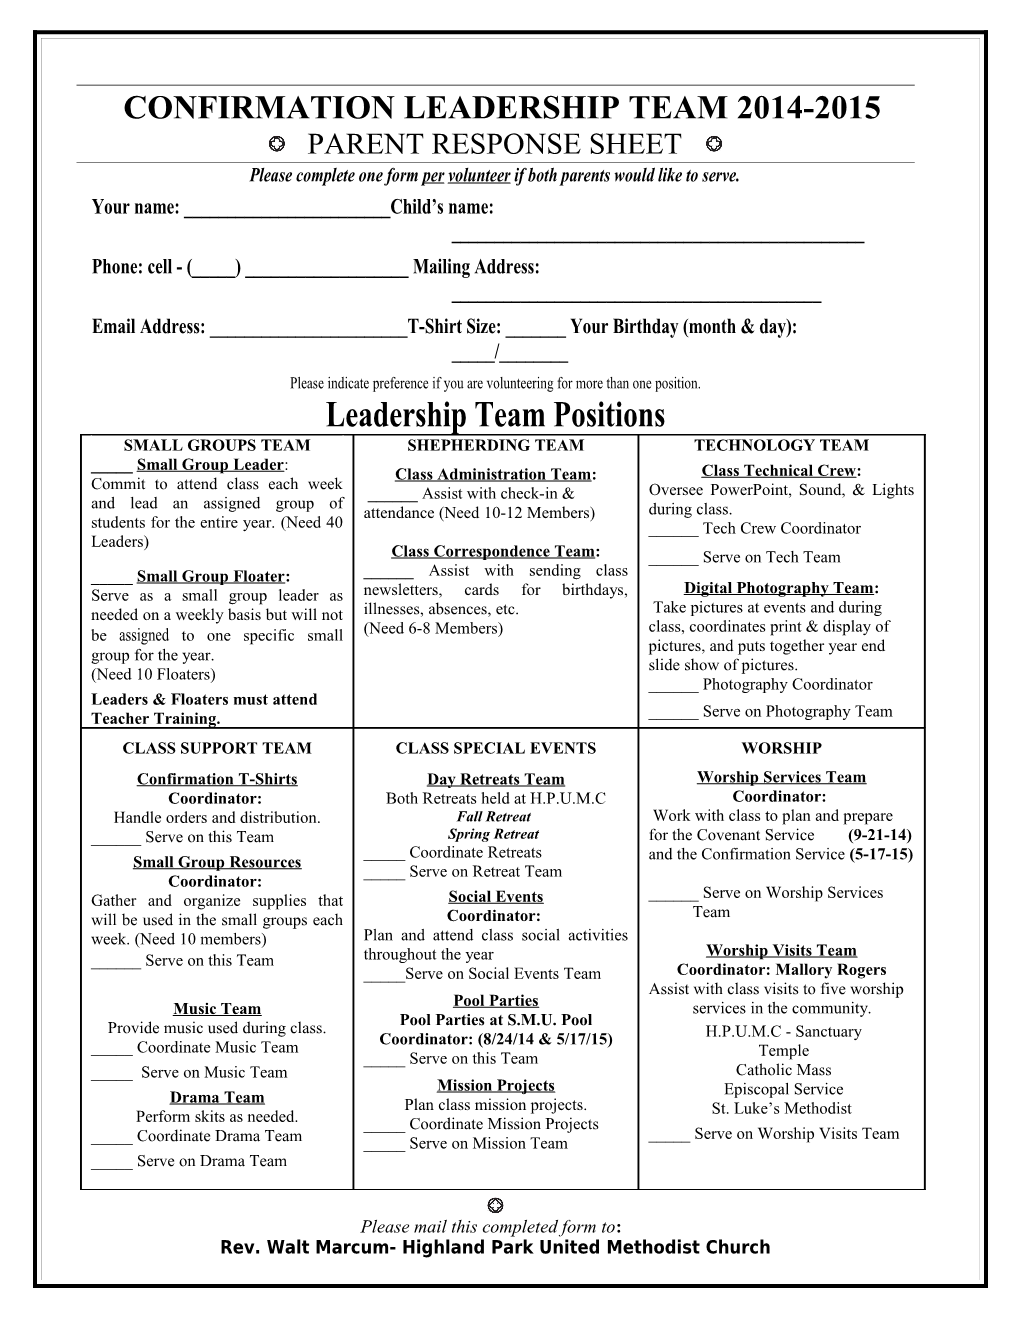 Invitation to the Confirmation Leadership Team of 2004-2005